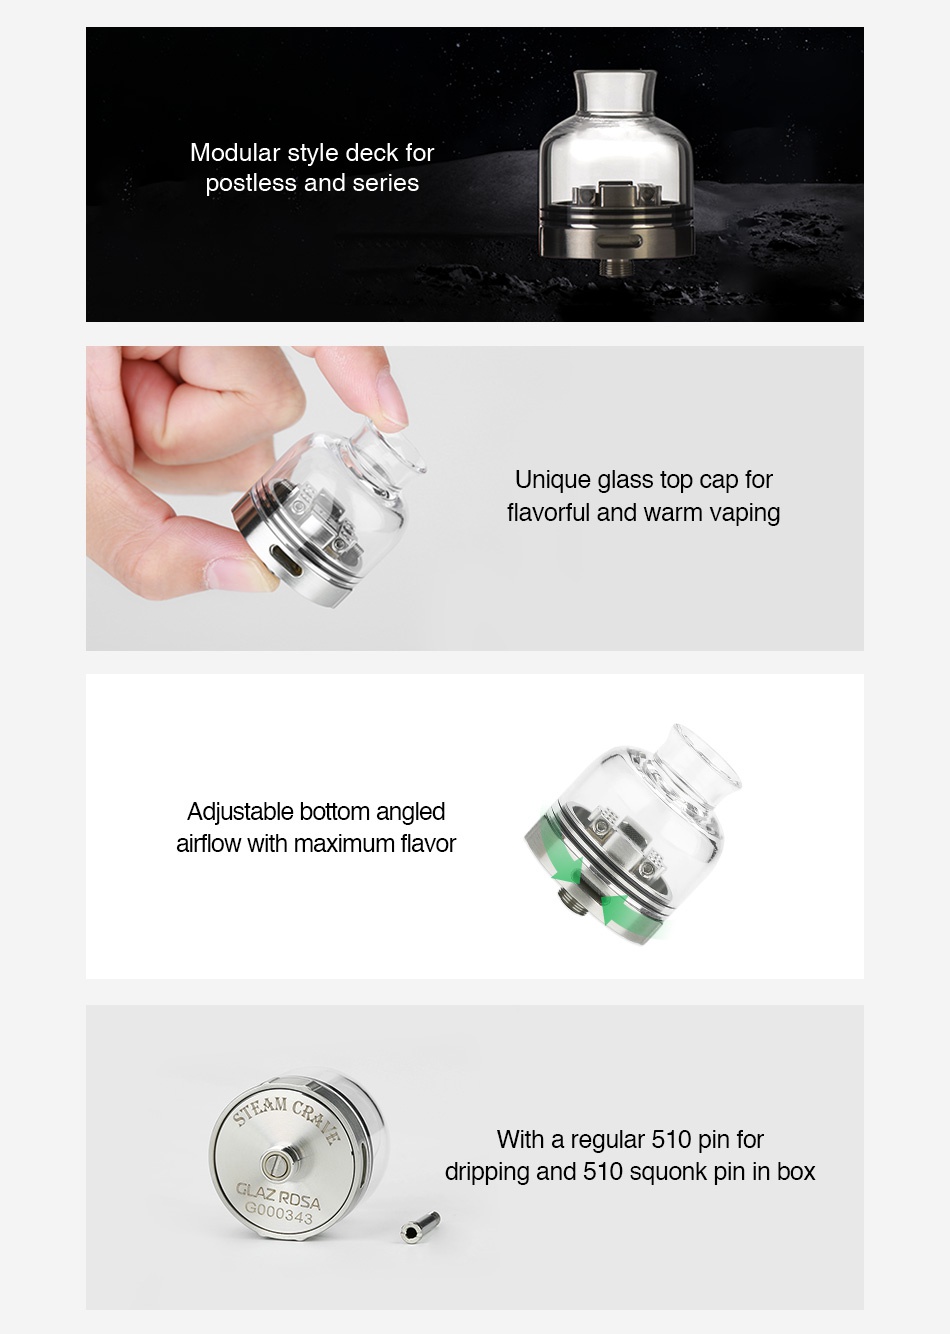 Steam Crave Glaz RDSA Modular style deck for postless and series Unique glass top cap for flavorful and warm vaping Adjustable bottom angled airflow with maximum flavor M With a regular 510 pin for dripping and 510 squonk pin in box 034